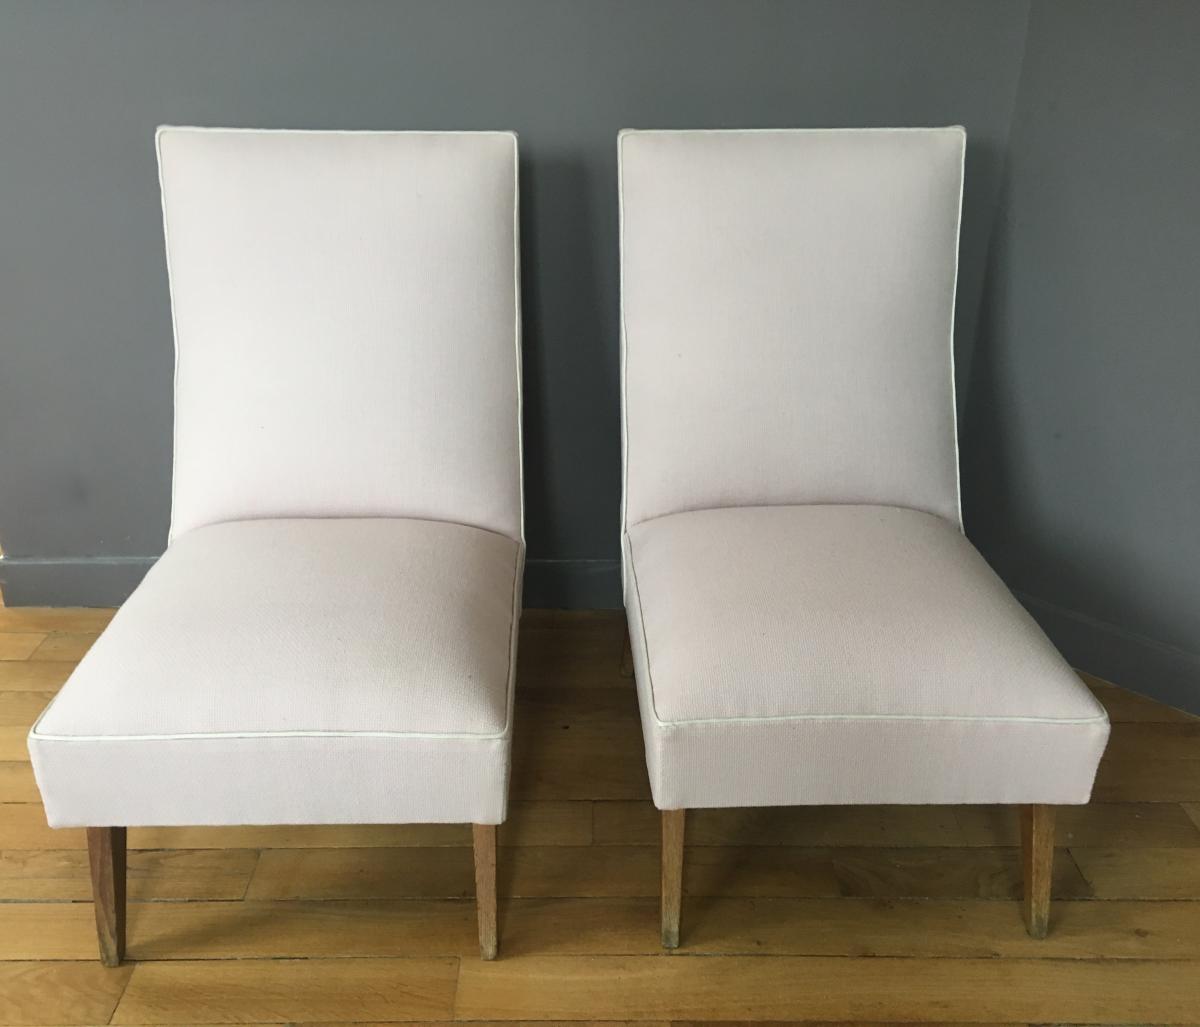 Pair Of Vintage 60's Fireside Chairs.